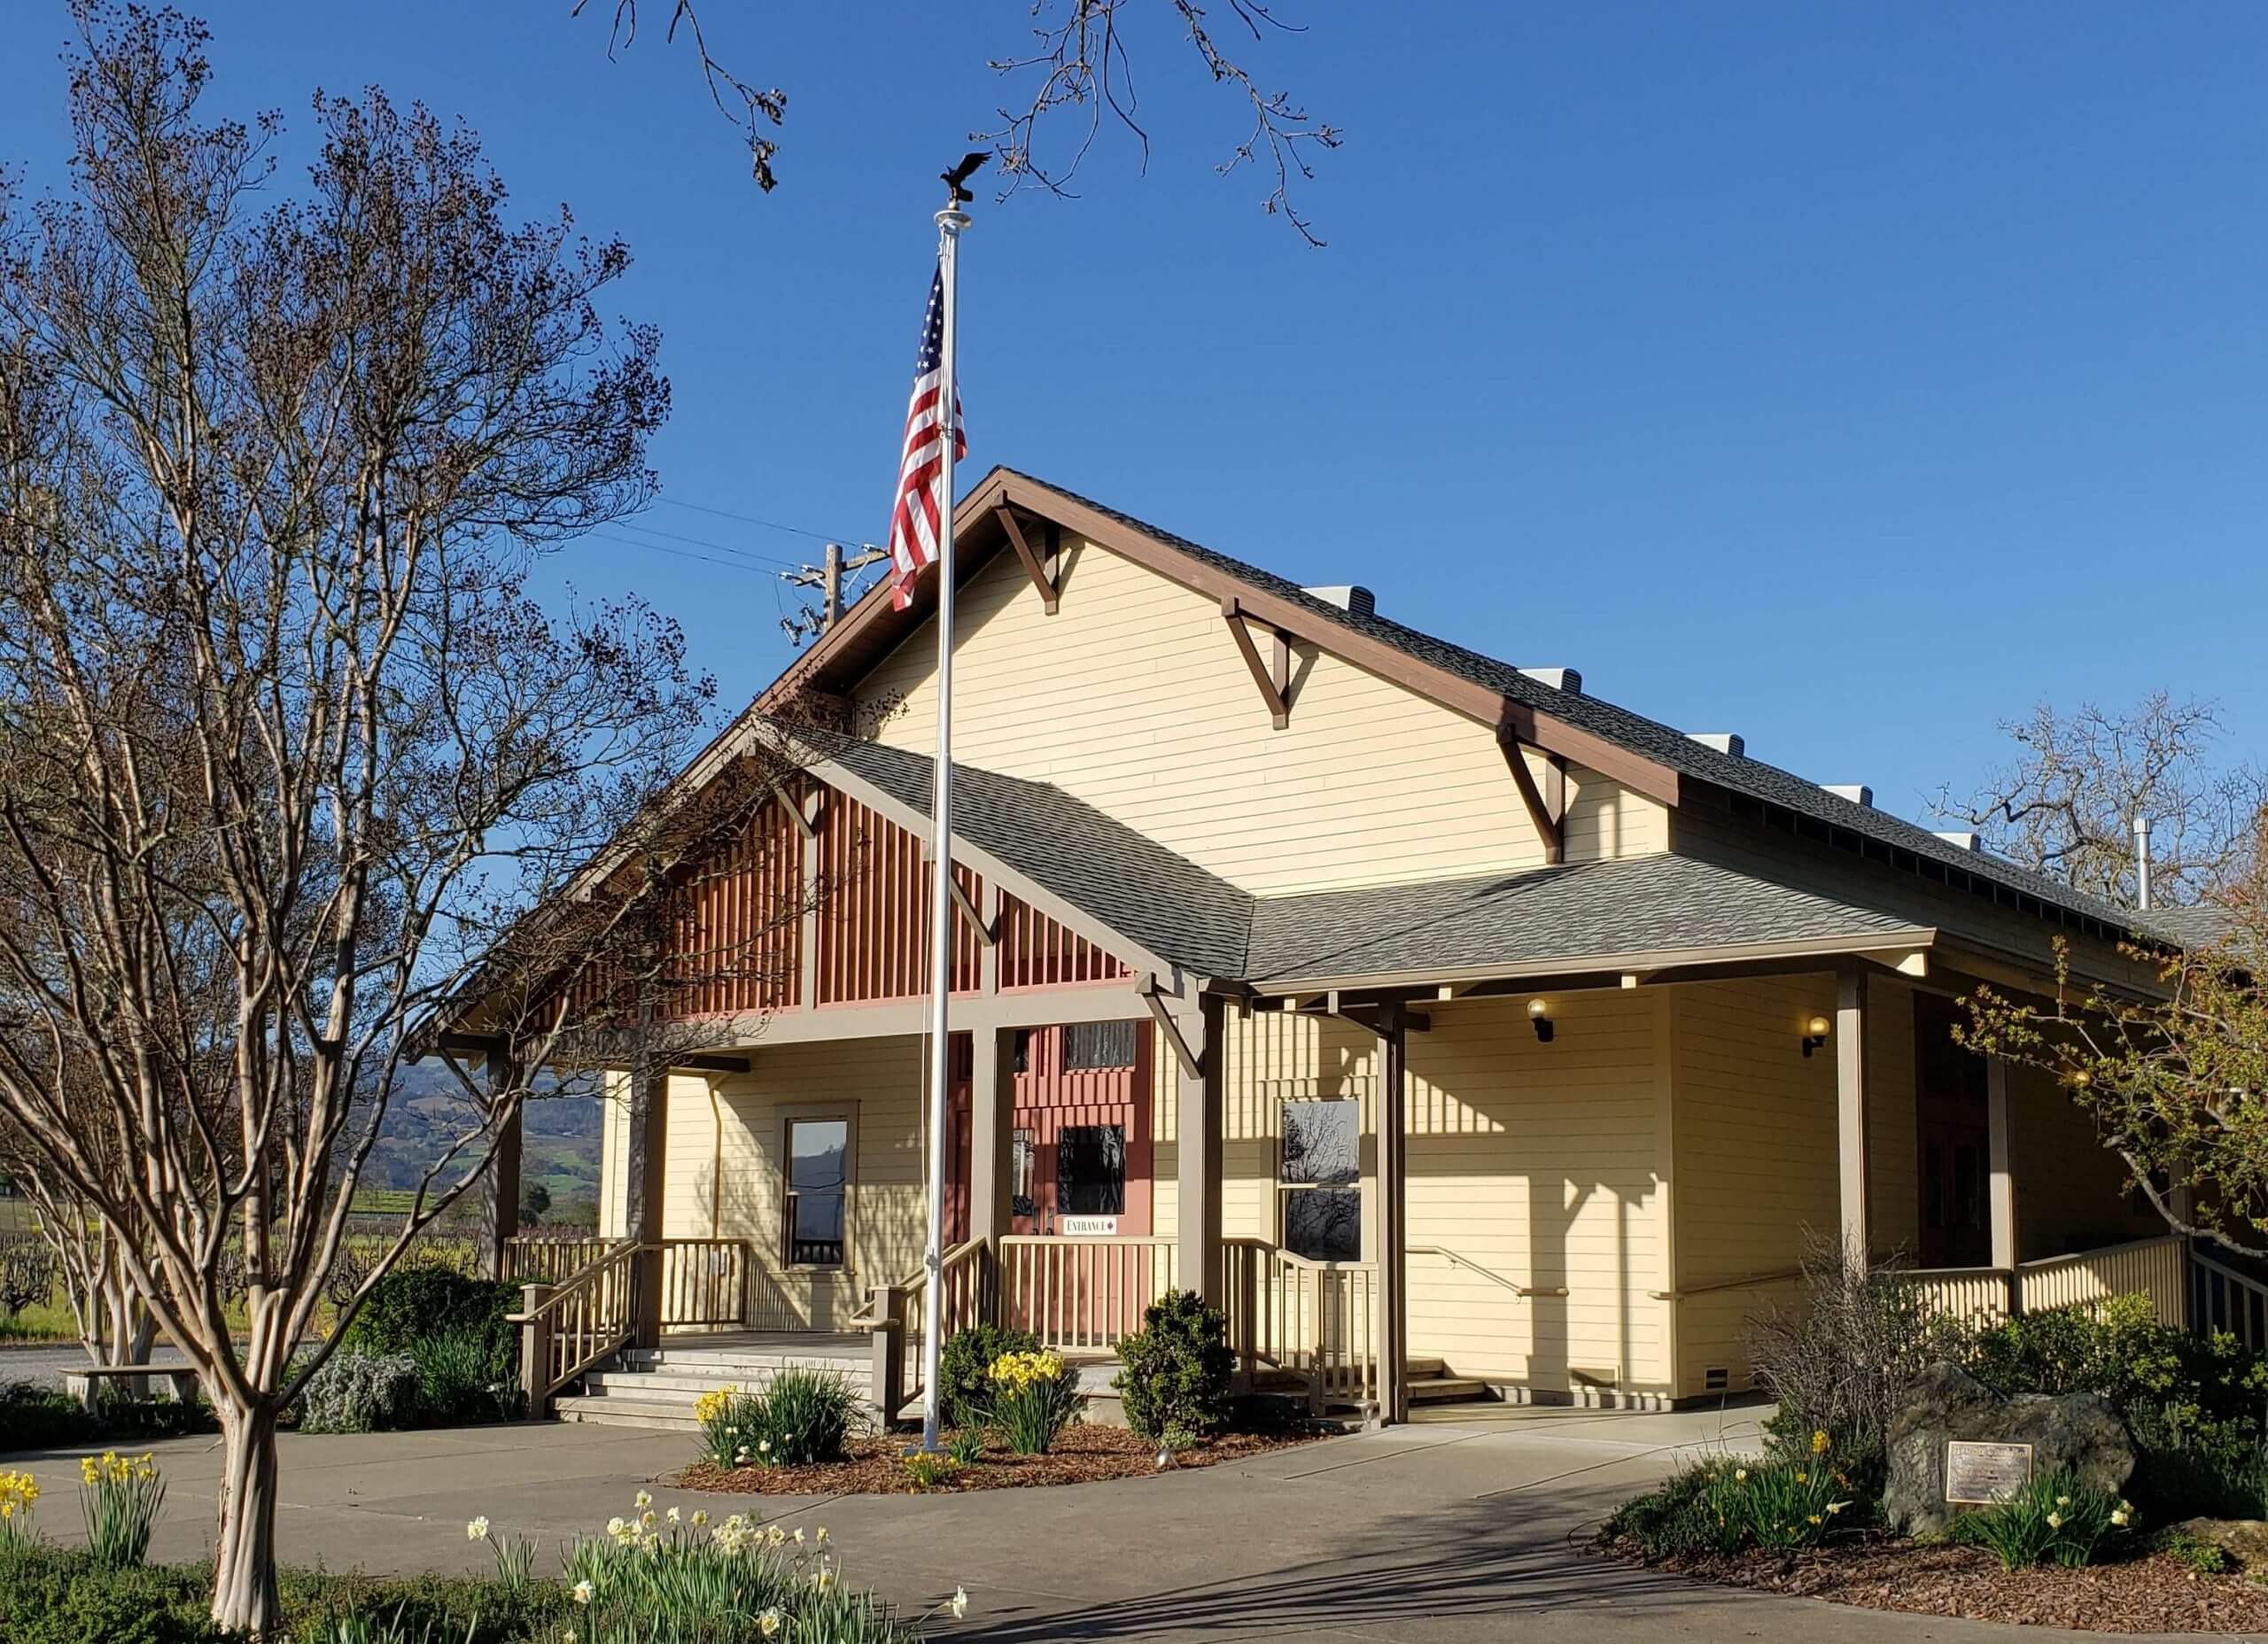 Front view of yellow and brown building with front porch and American flag